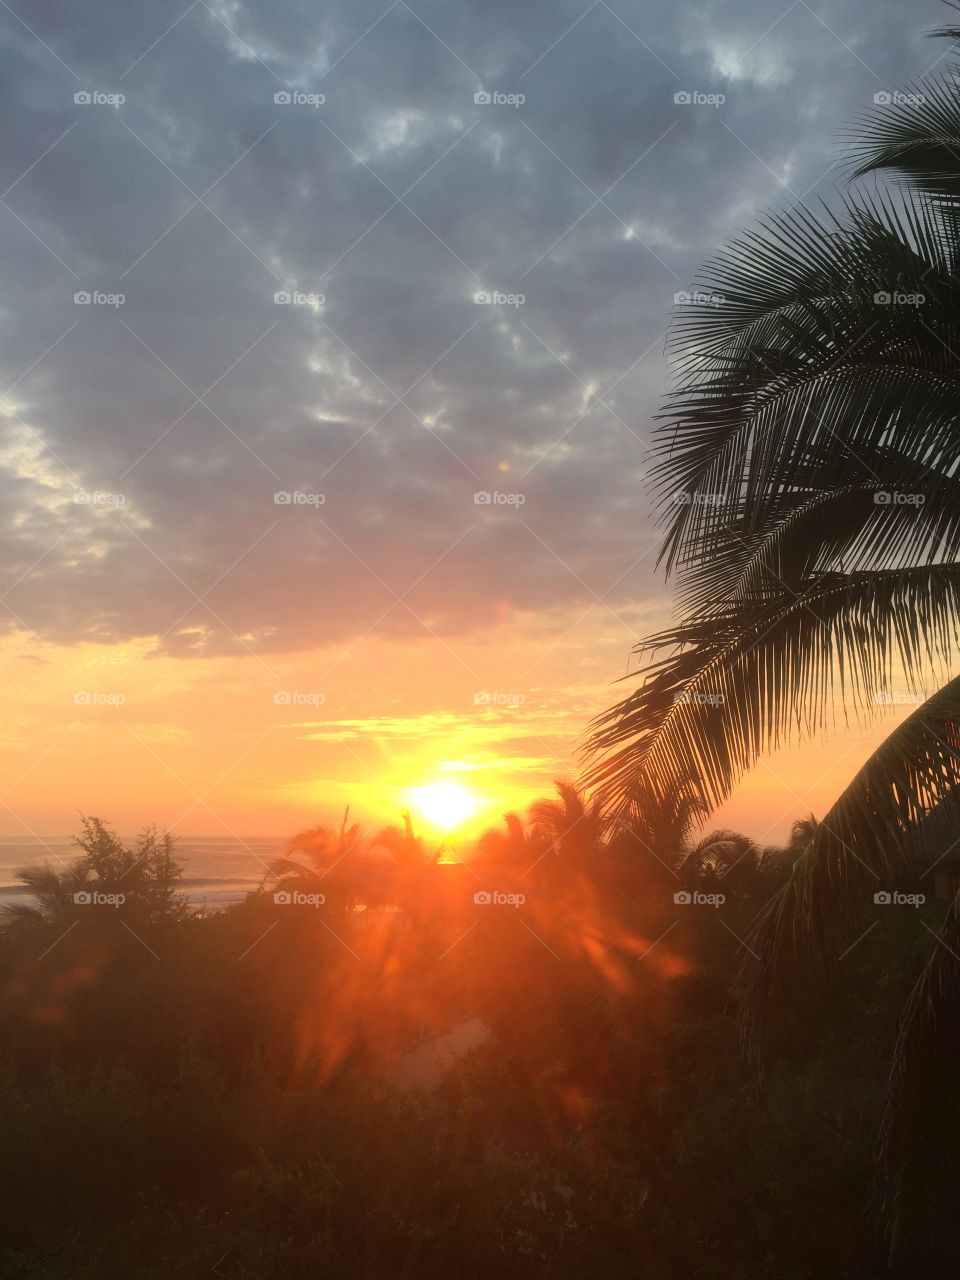 Sunset in Zihuatanejo 